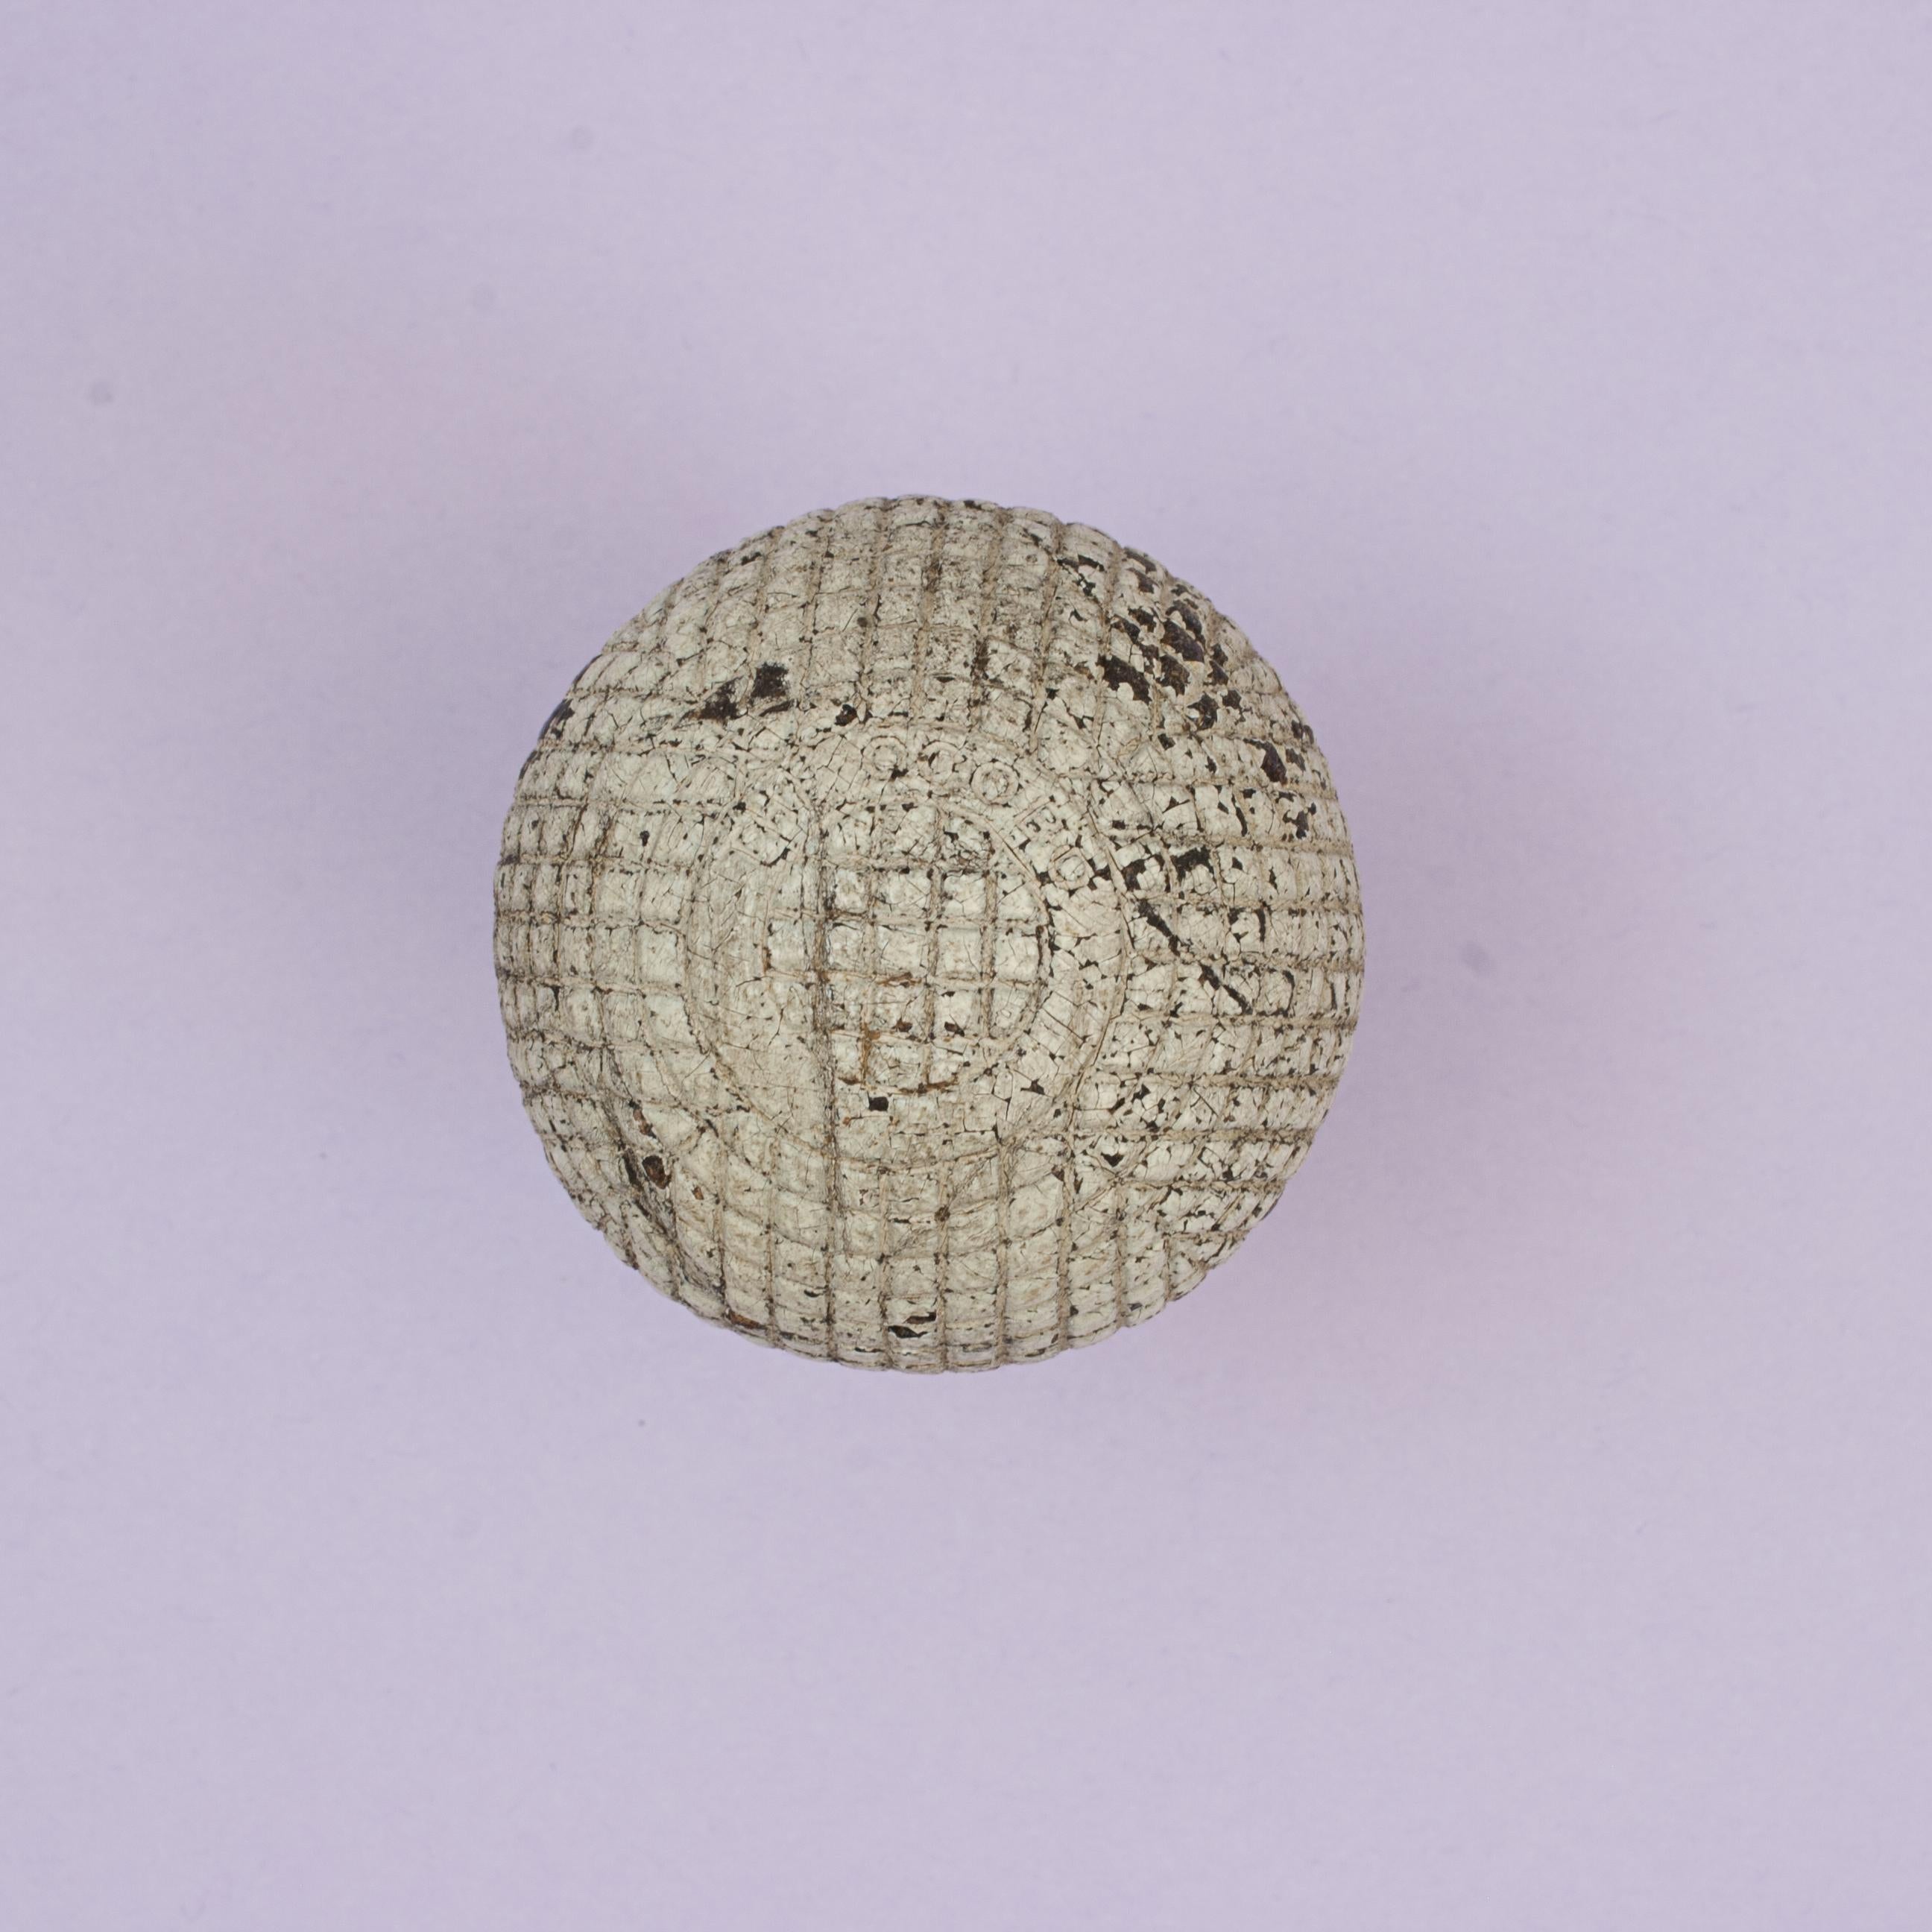 Ocobo 27 ½, Antique Gutta Percha Golf Ball.
A good example of a moulded 'Ocobo' mesh patterned Victorian gutta percha golf ball manufactured by J.B. Halley & Co. Ltd. 76 Finsbury Pavement, London. The ball is marked 'The Ocobo 27½' on a raised